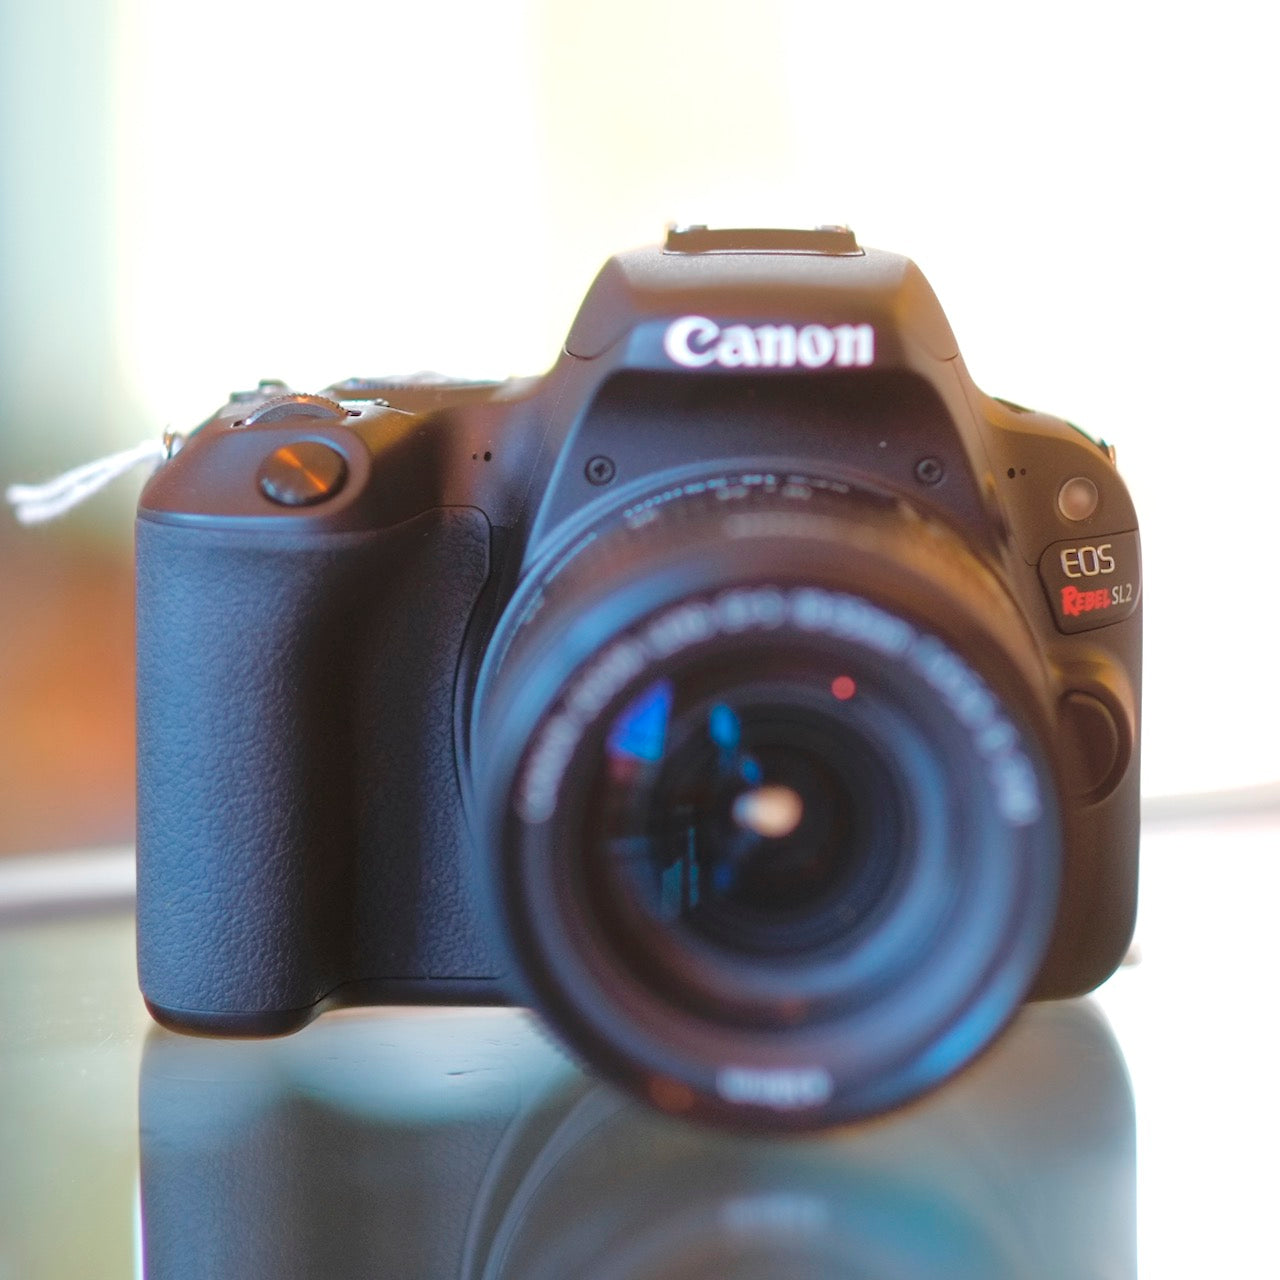 Canon EOS Rebel SL2 with 18-55mm f3.5-5.6 IS STM